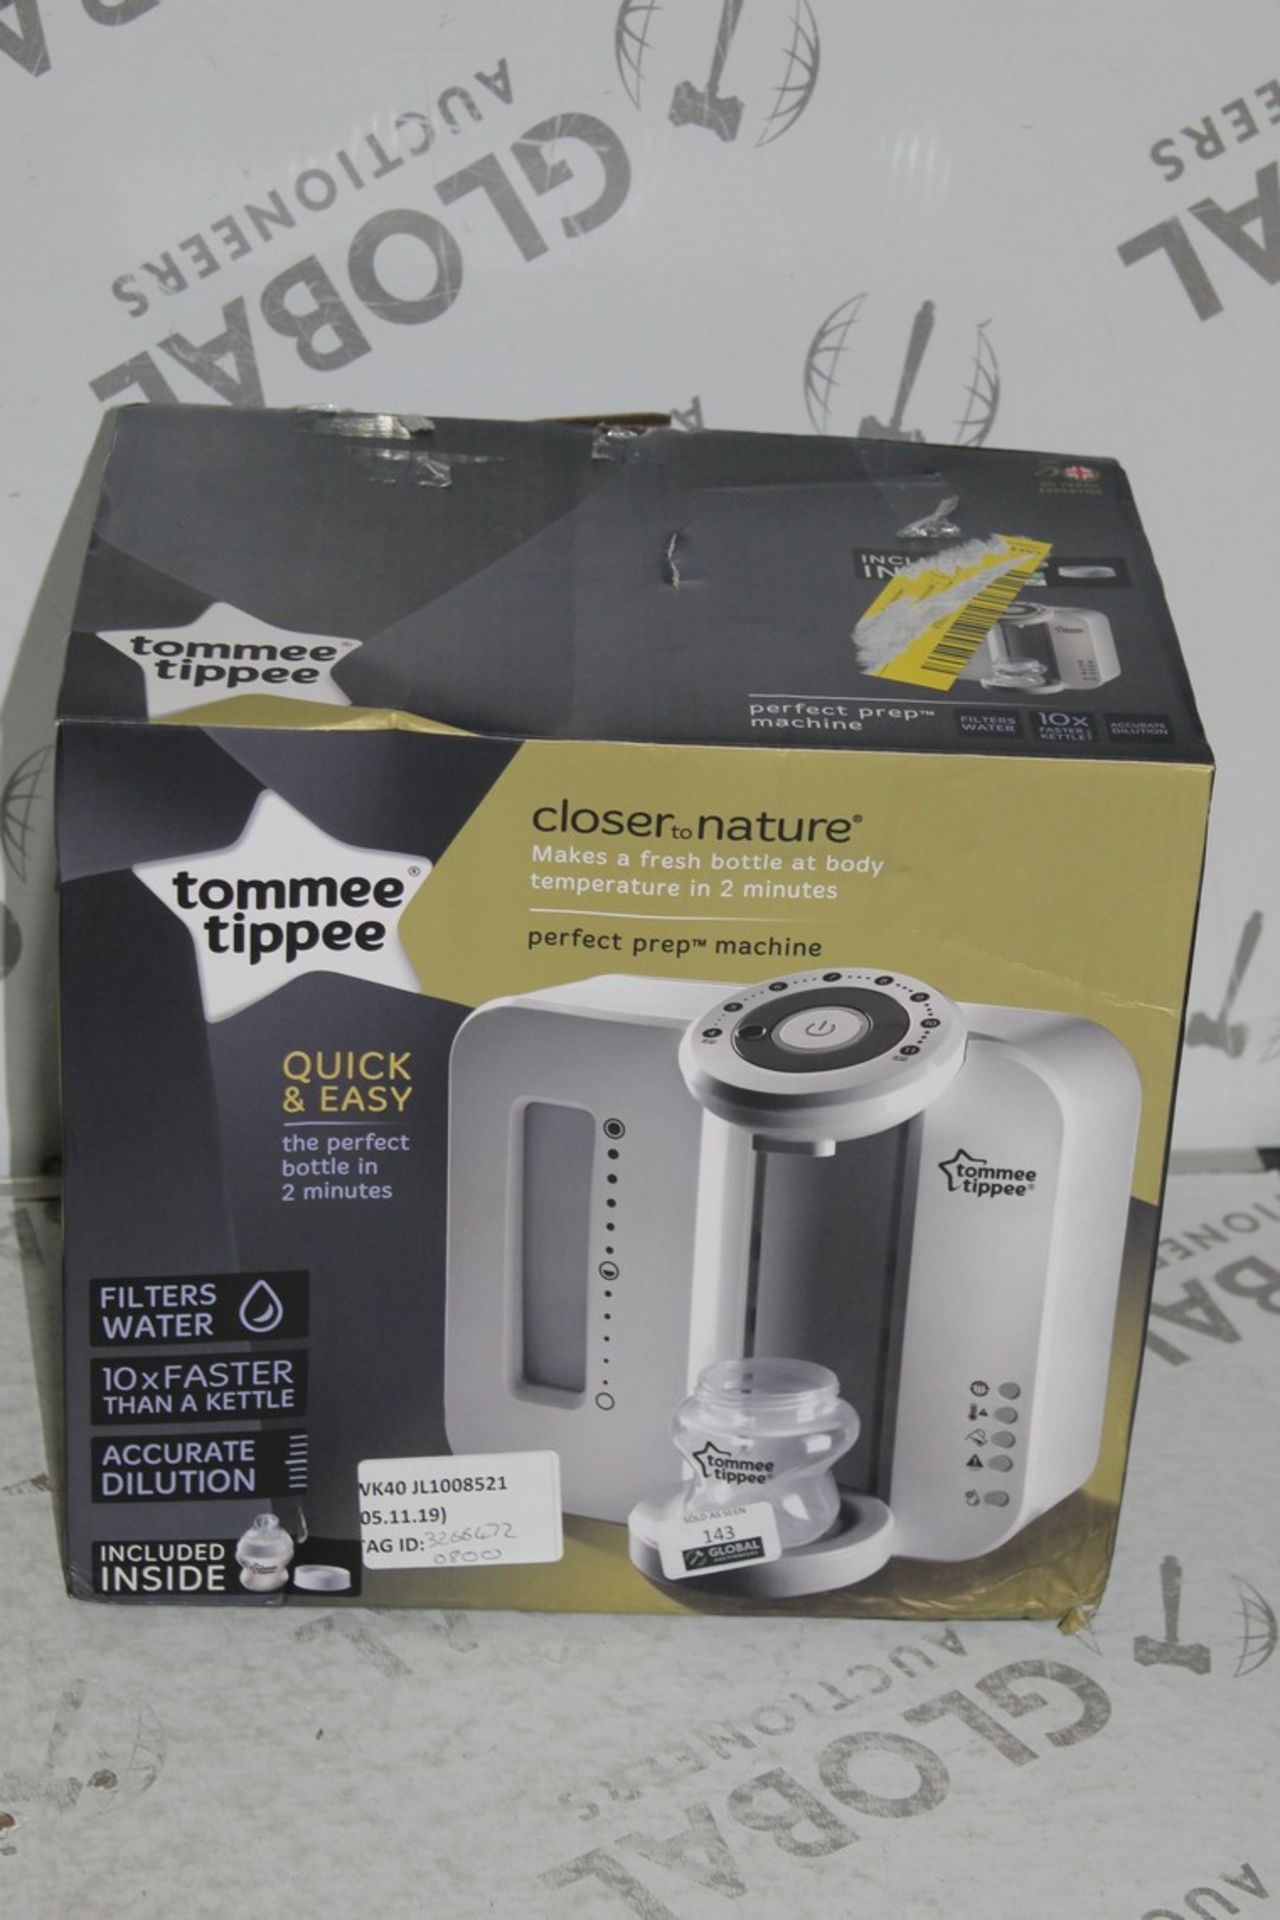 Boxed Tommee Tippee Closer to Nature Perfect Preparation Bottle Warming Station RRP £80 (3266472) (